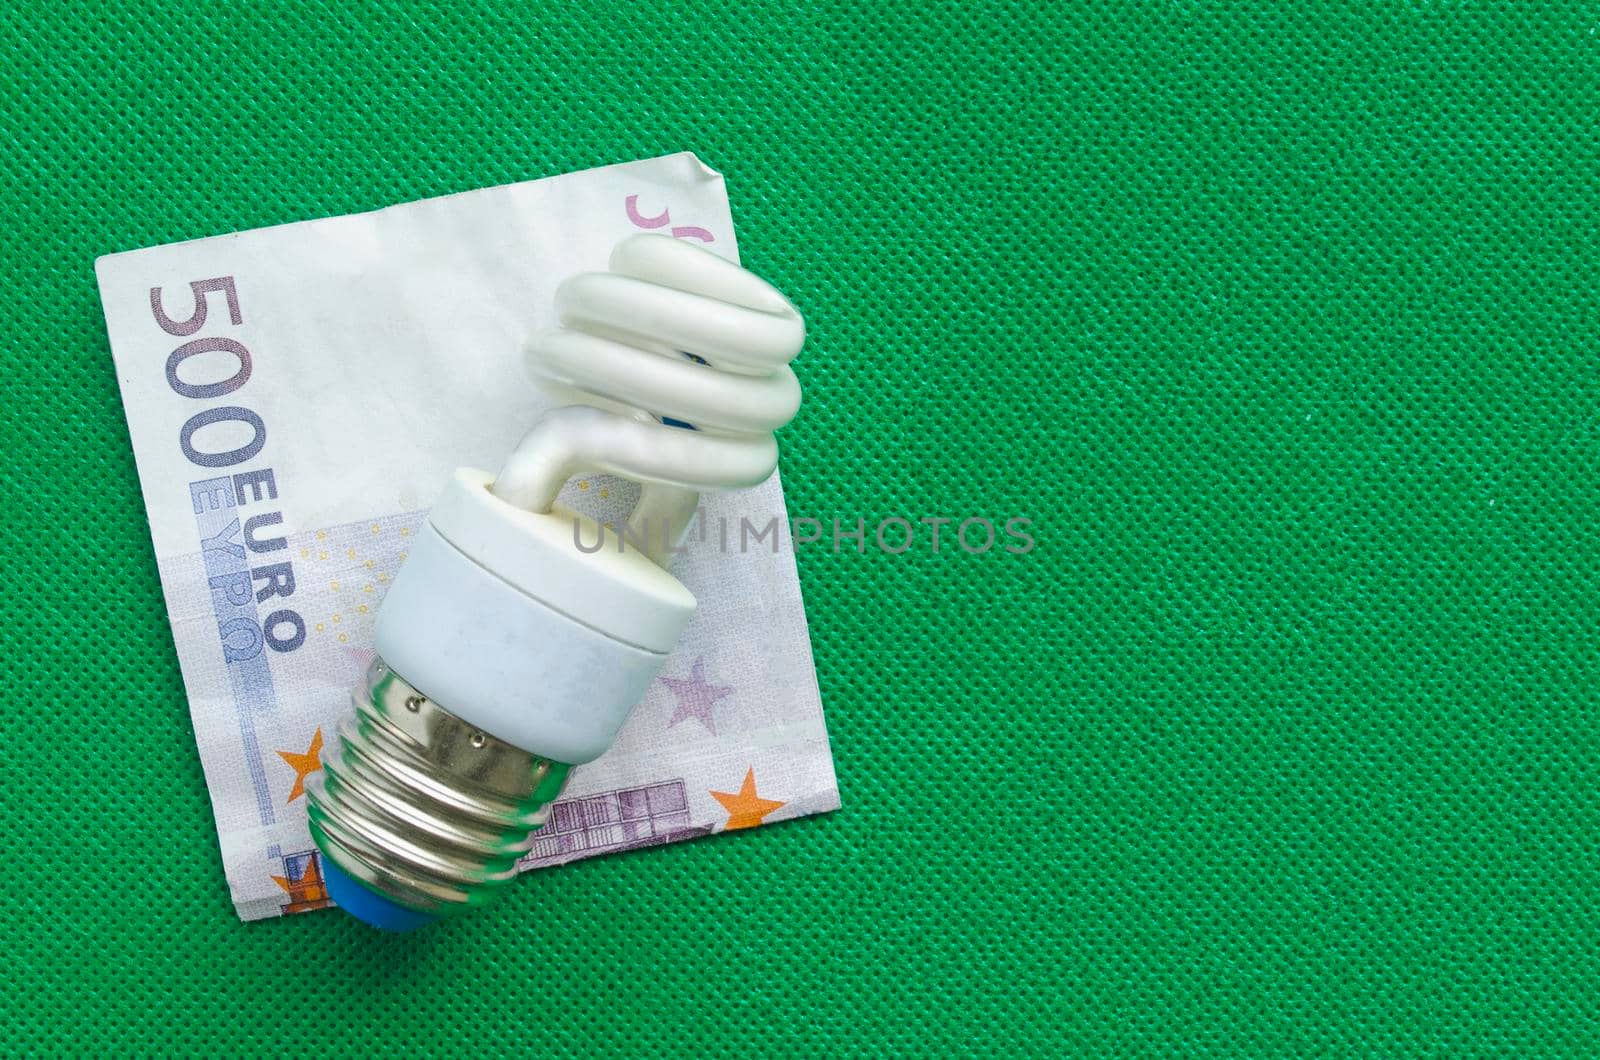 Energy-saving lamp and euro banknote on green background, copyspace. by andre_dechapelle